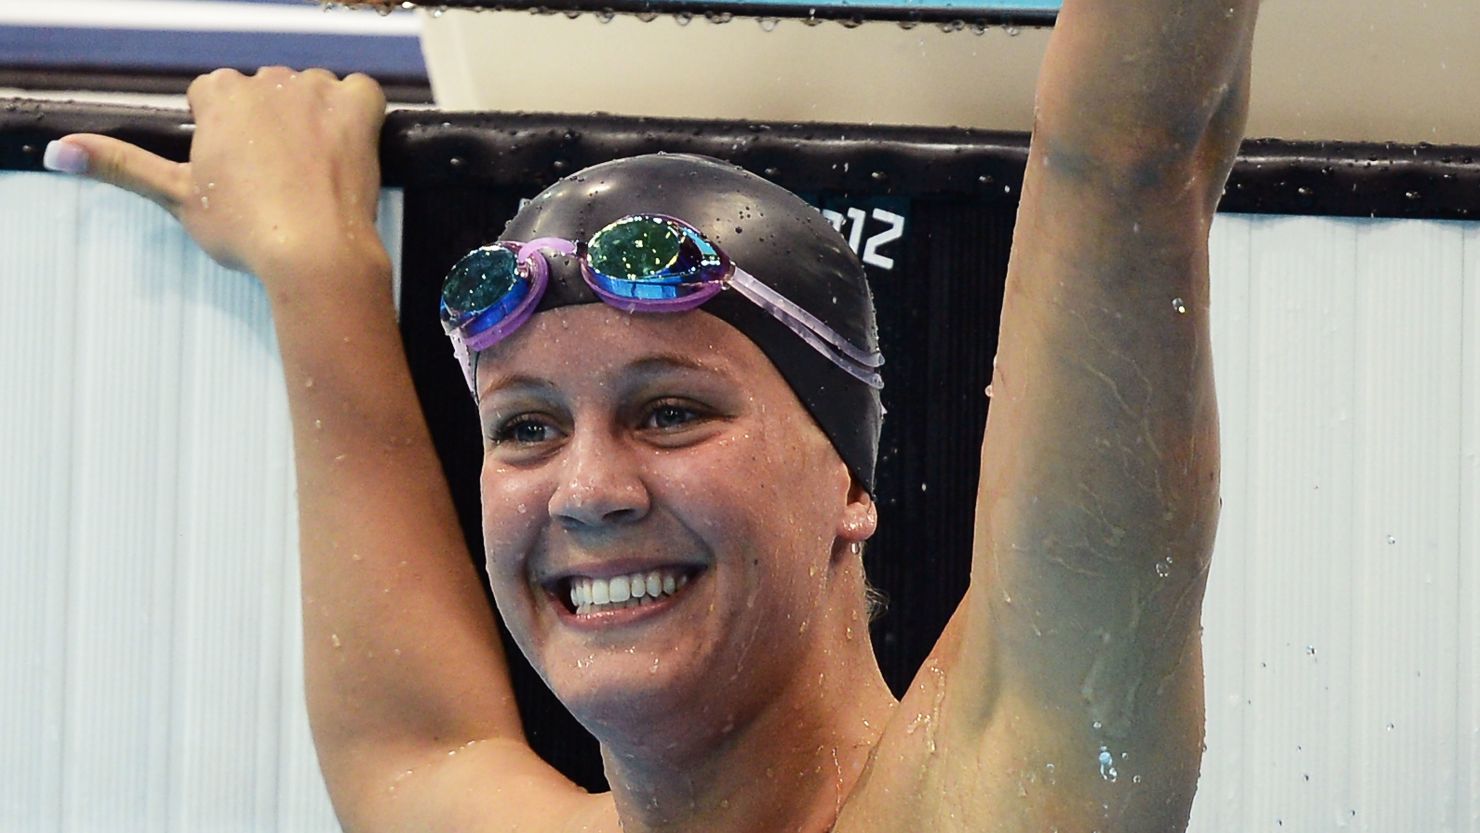 USA's Mallory Weggemann celebrates after winning the 50m freestyle S8 event at the London Paralympics.